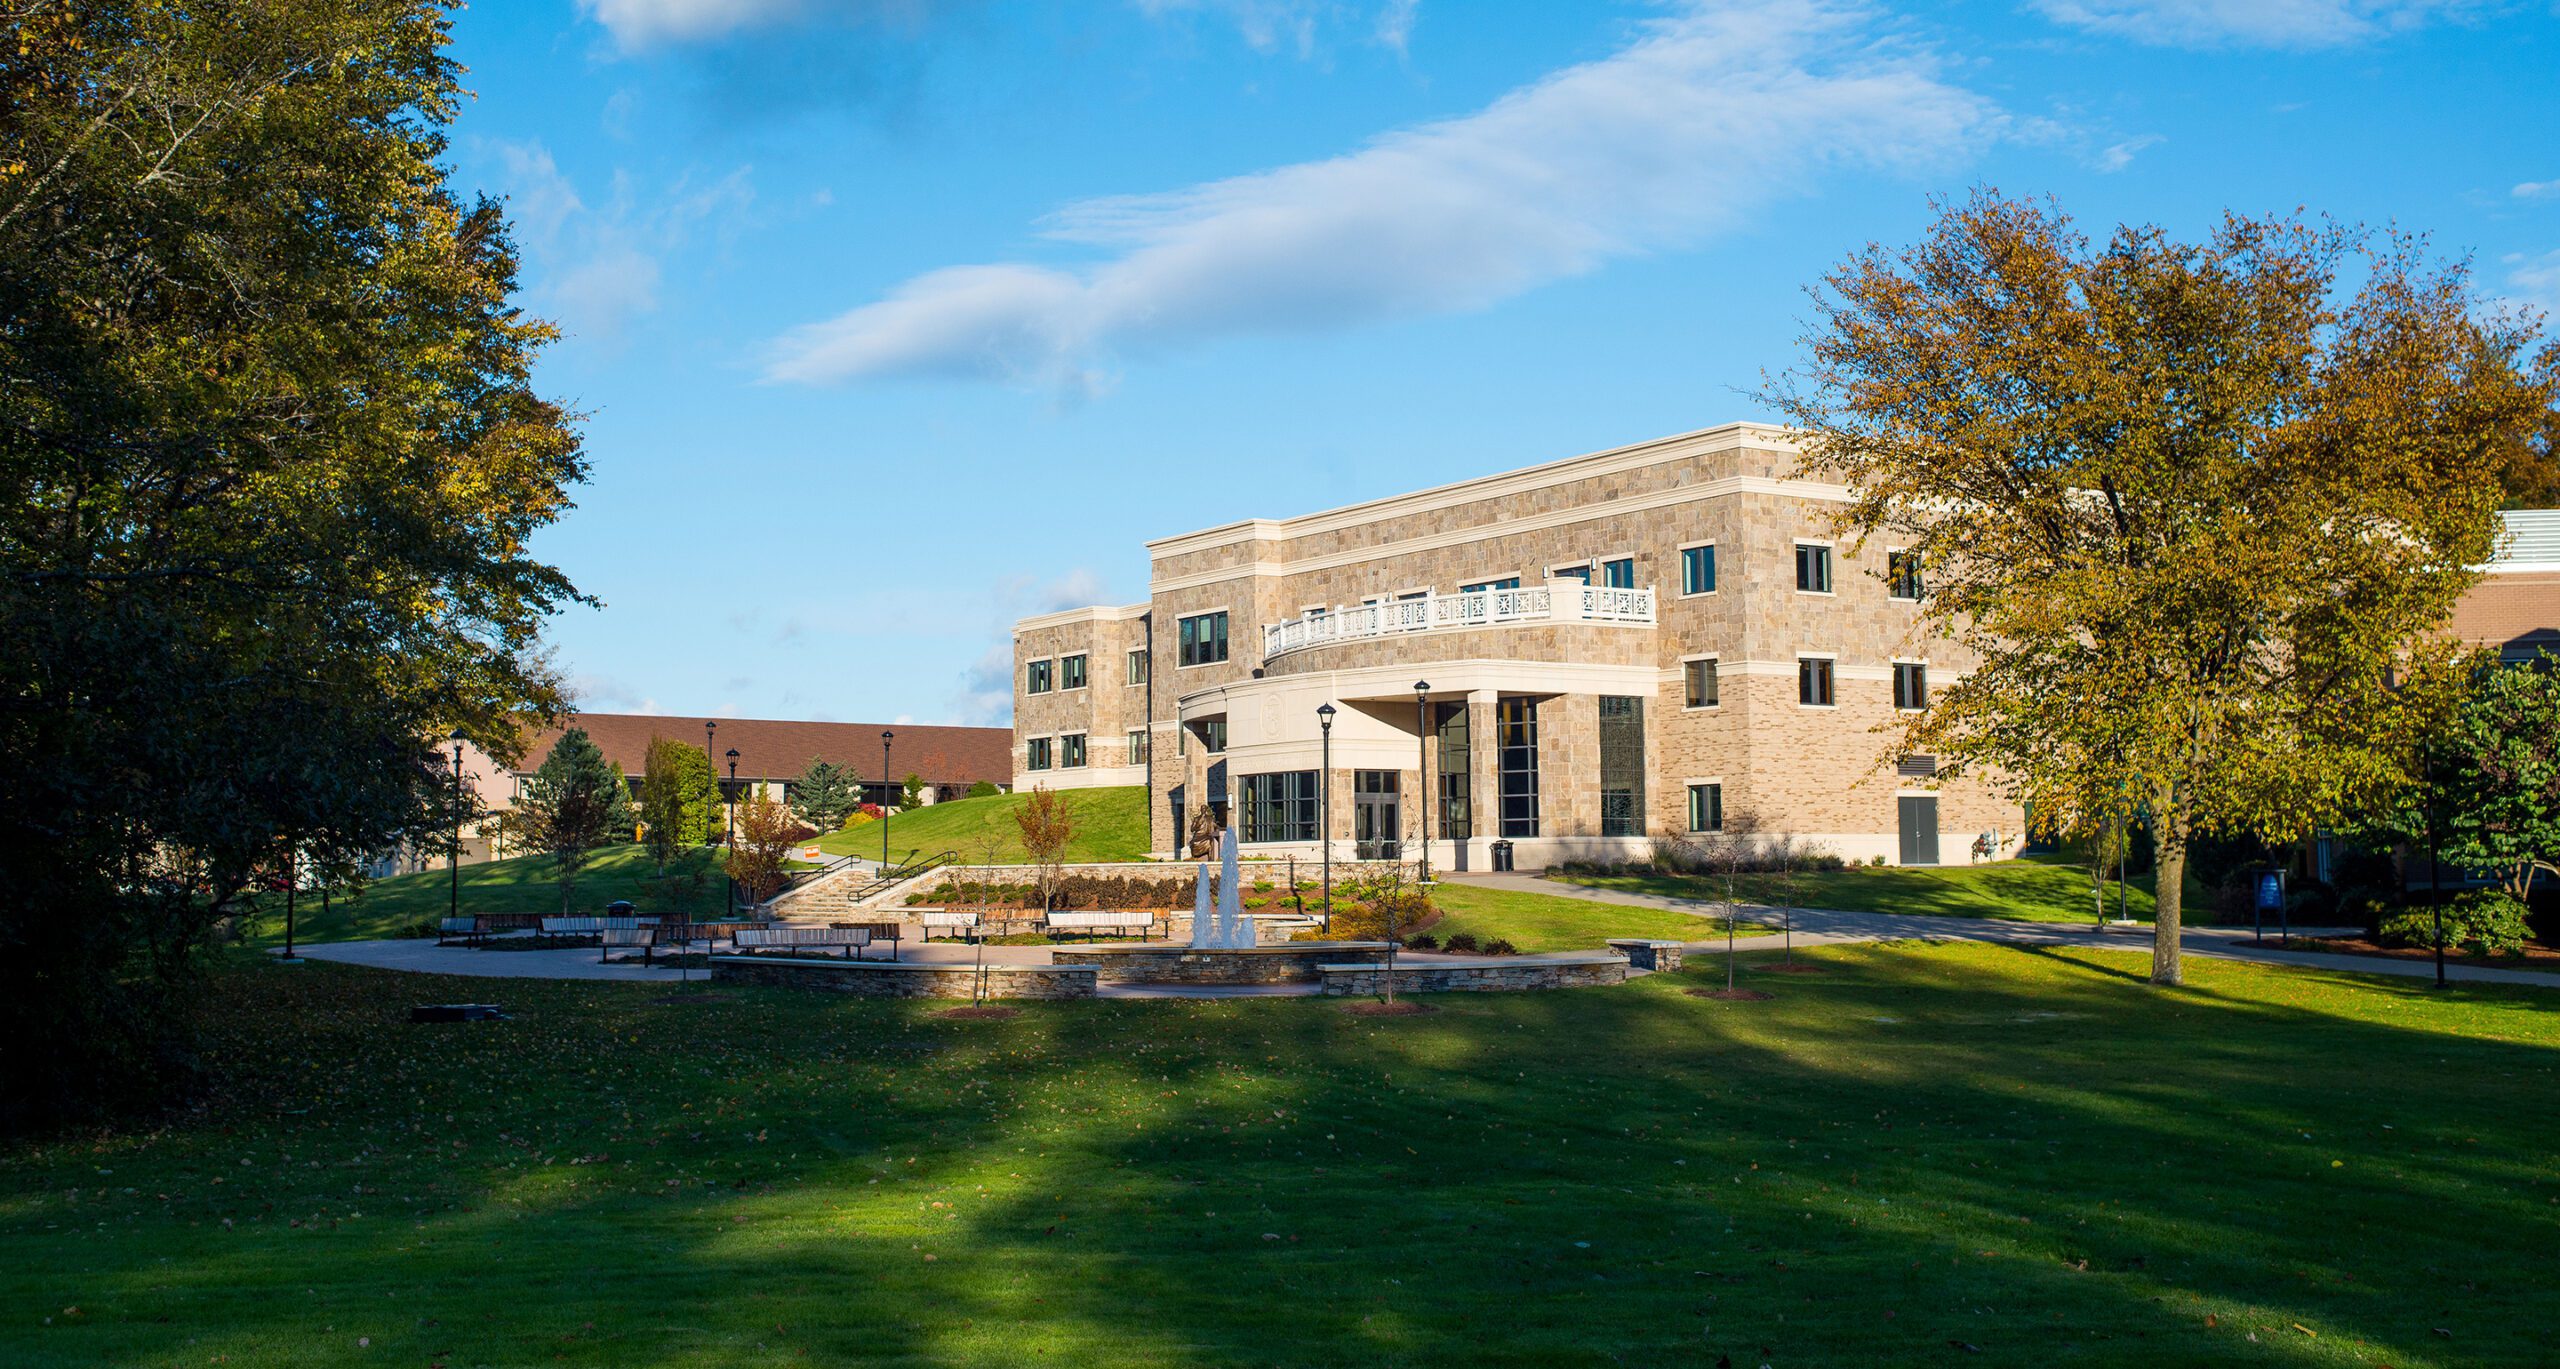 An exterior view of the Tsotsis Family Academic Center in early fall on the Assumption College campus.